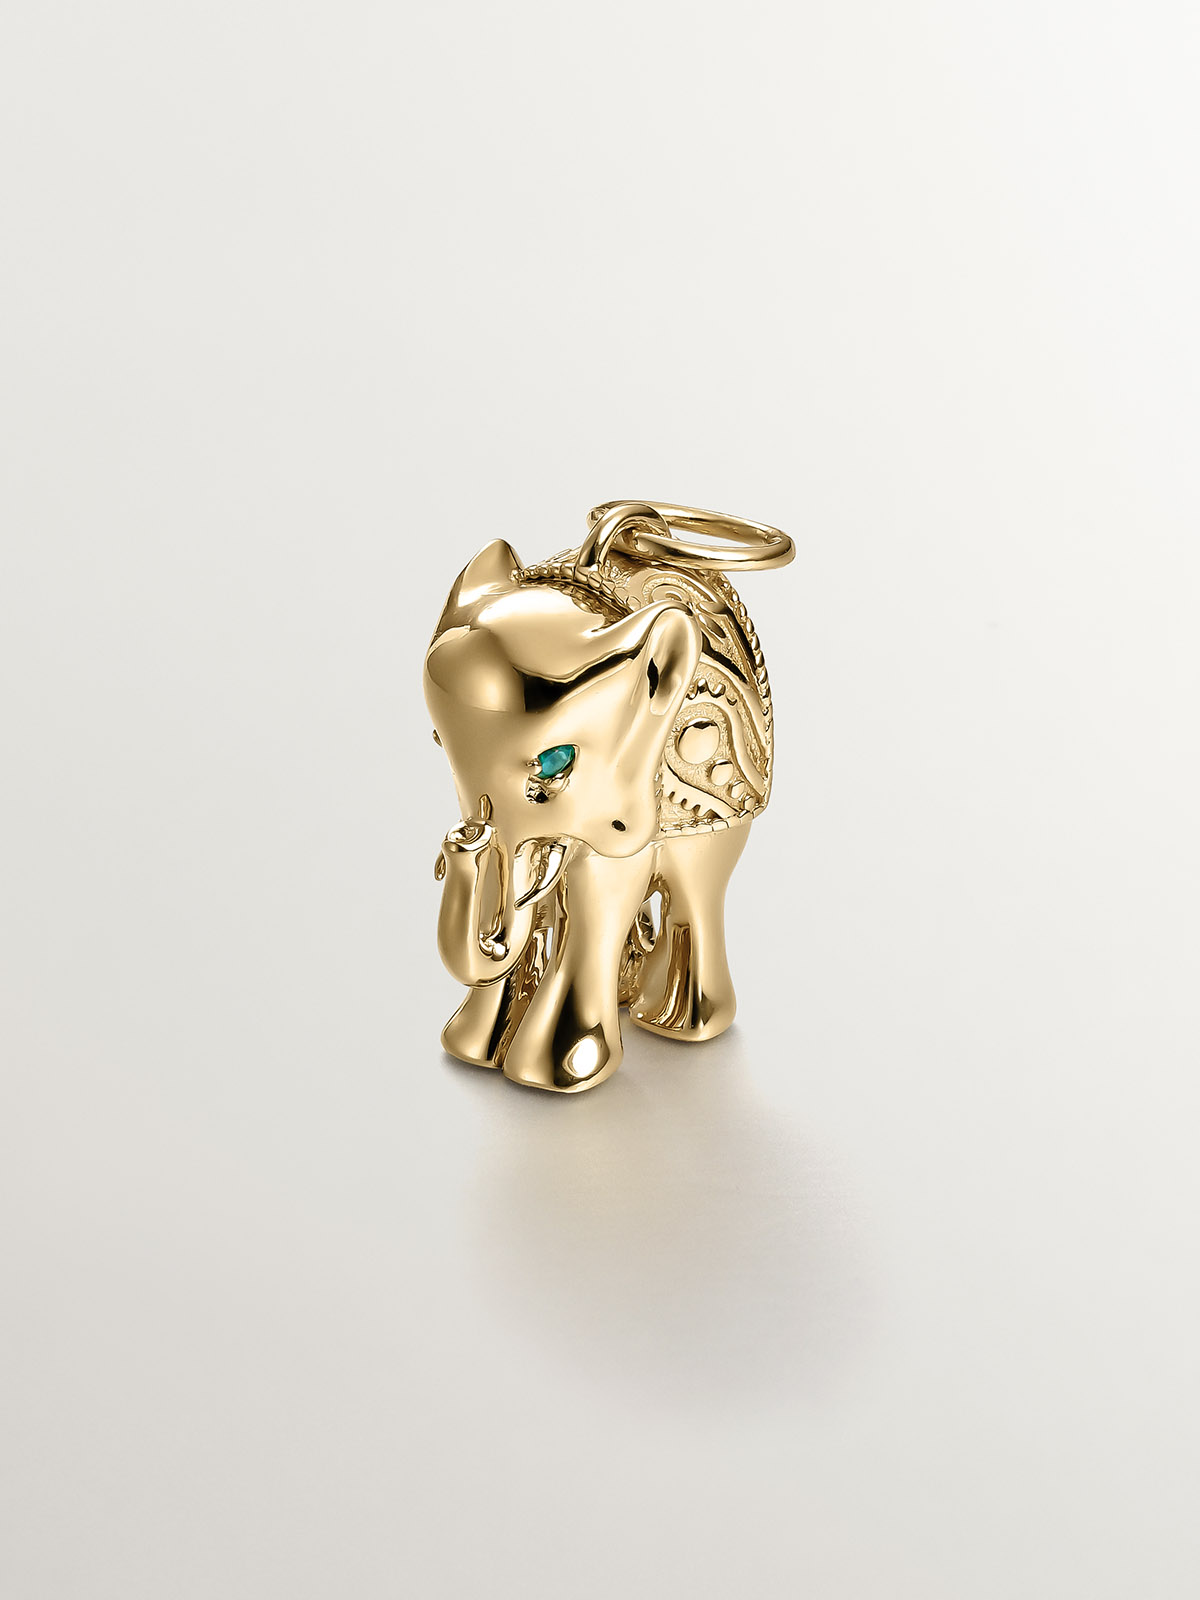 925 silver charm bathed in 18k yellow gold with green ónix and elephant shape